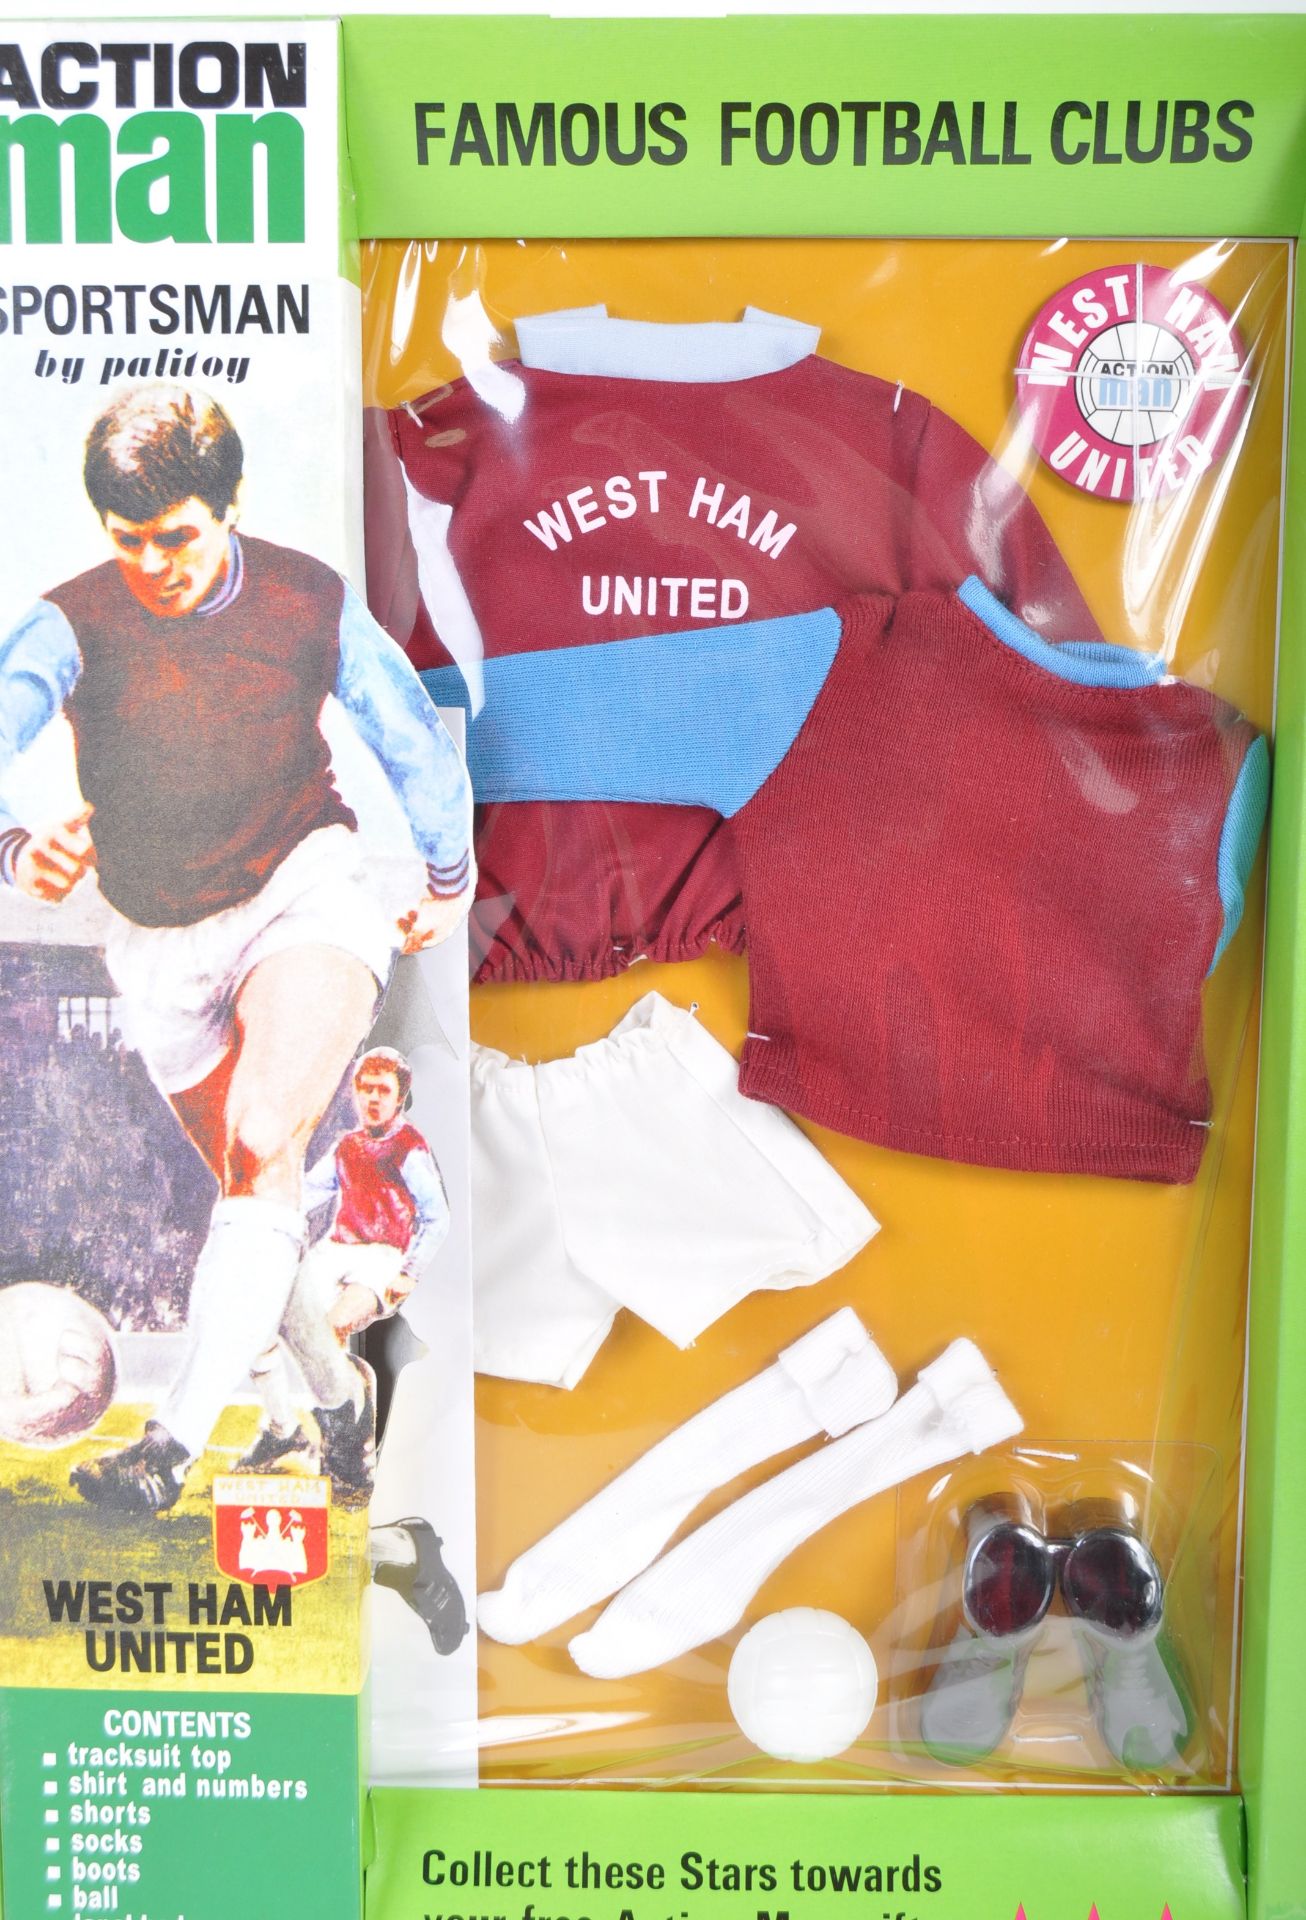 ACTION MAN 40TH ANNIVERSARY FAMOUS FOOTBALL CLUB UNIFORMS - Image 2 of 4